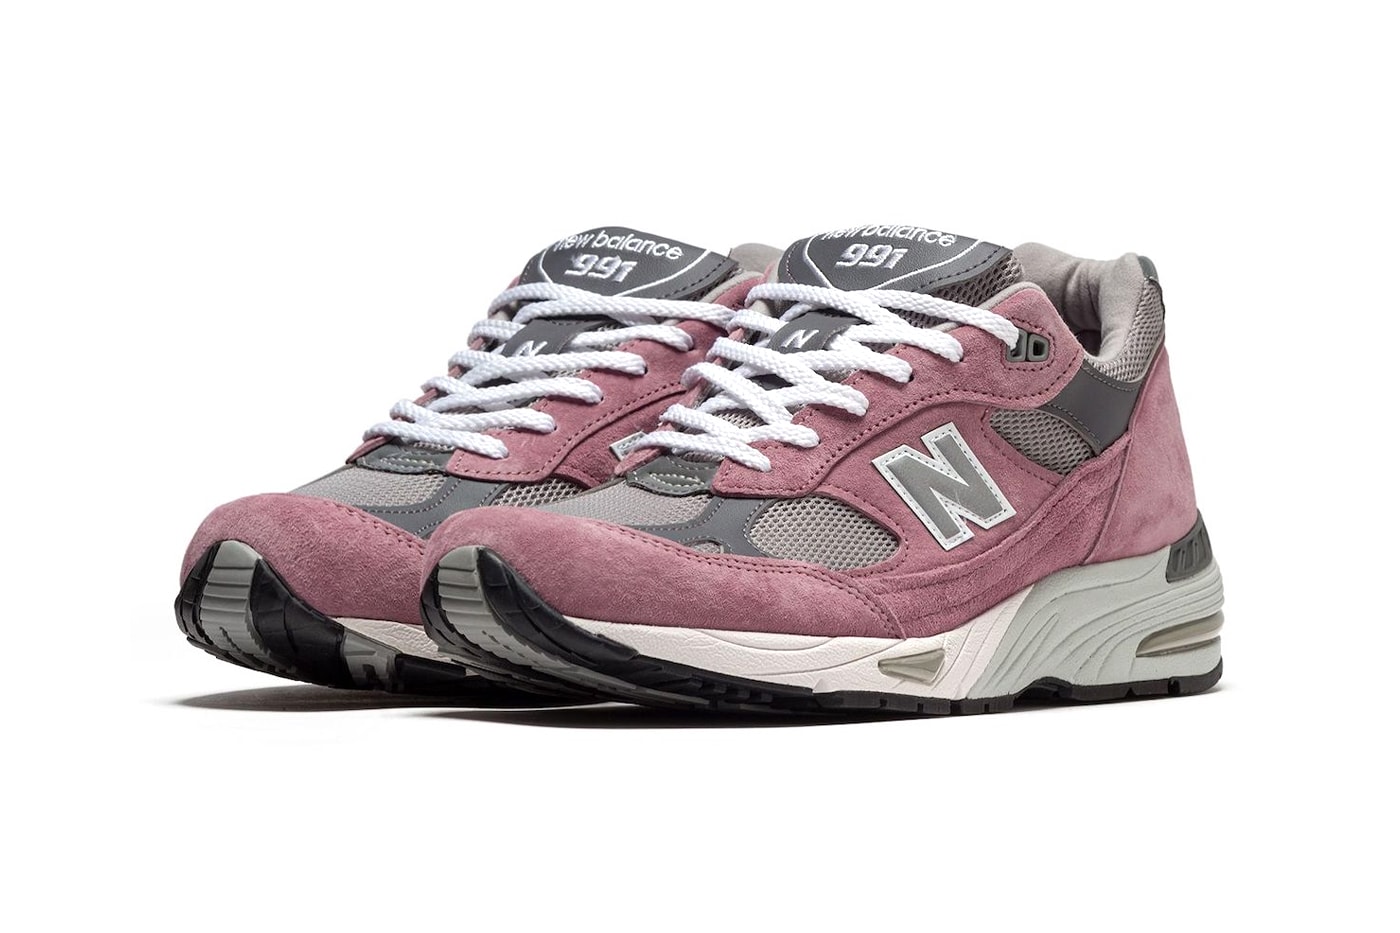 New Balance 991 Arrives in "Pink Suede" Made in UK M991PGG dad shoes sneakers pink pig skin suede darker shade grey